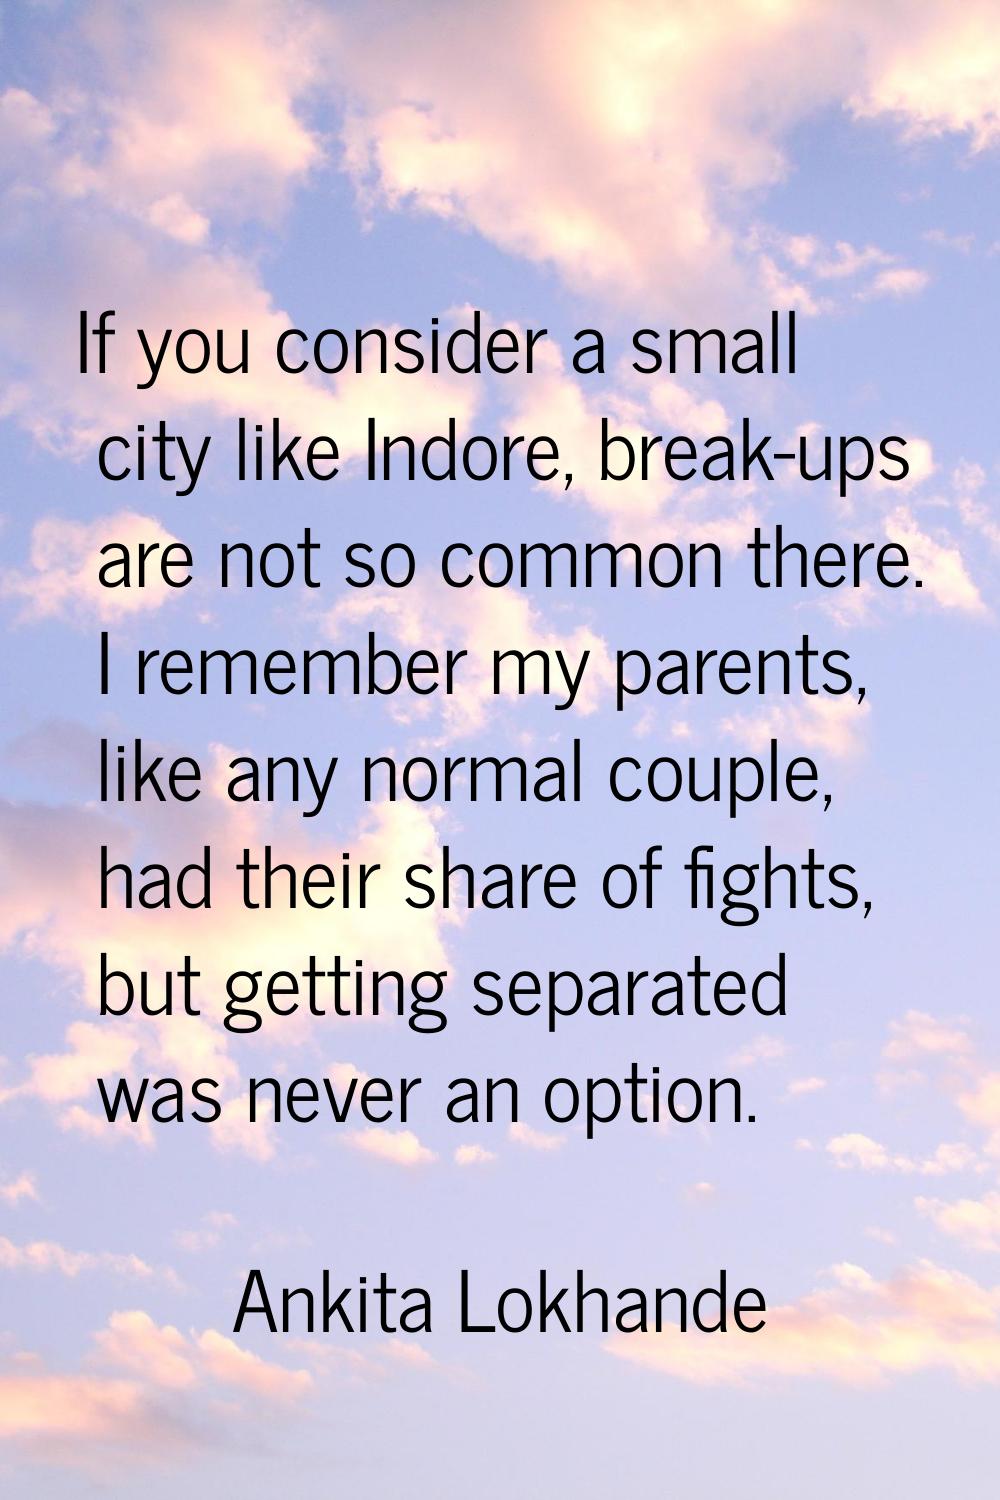 If you consider a small city like Indore, break-ups are not so common there. I remember my parents,